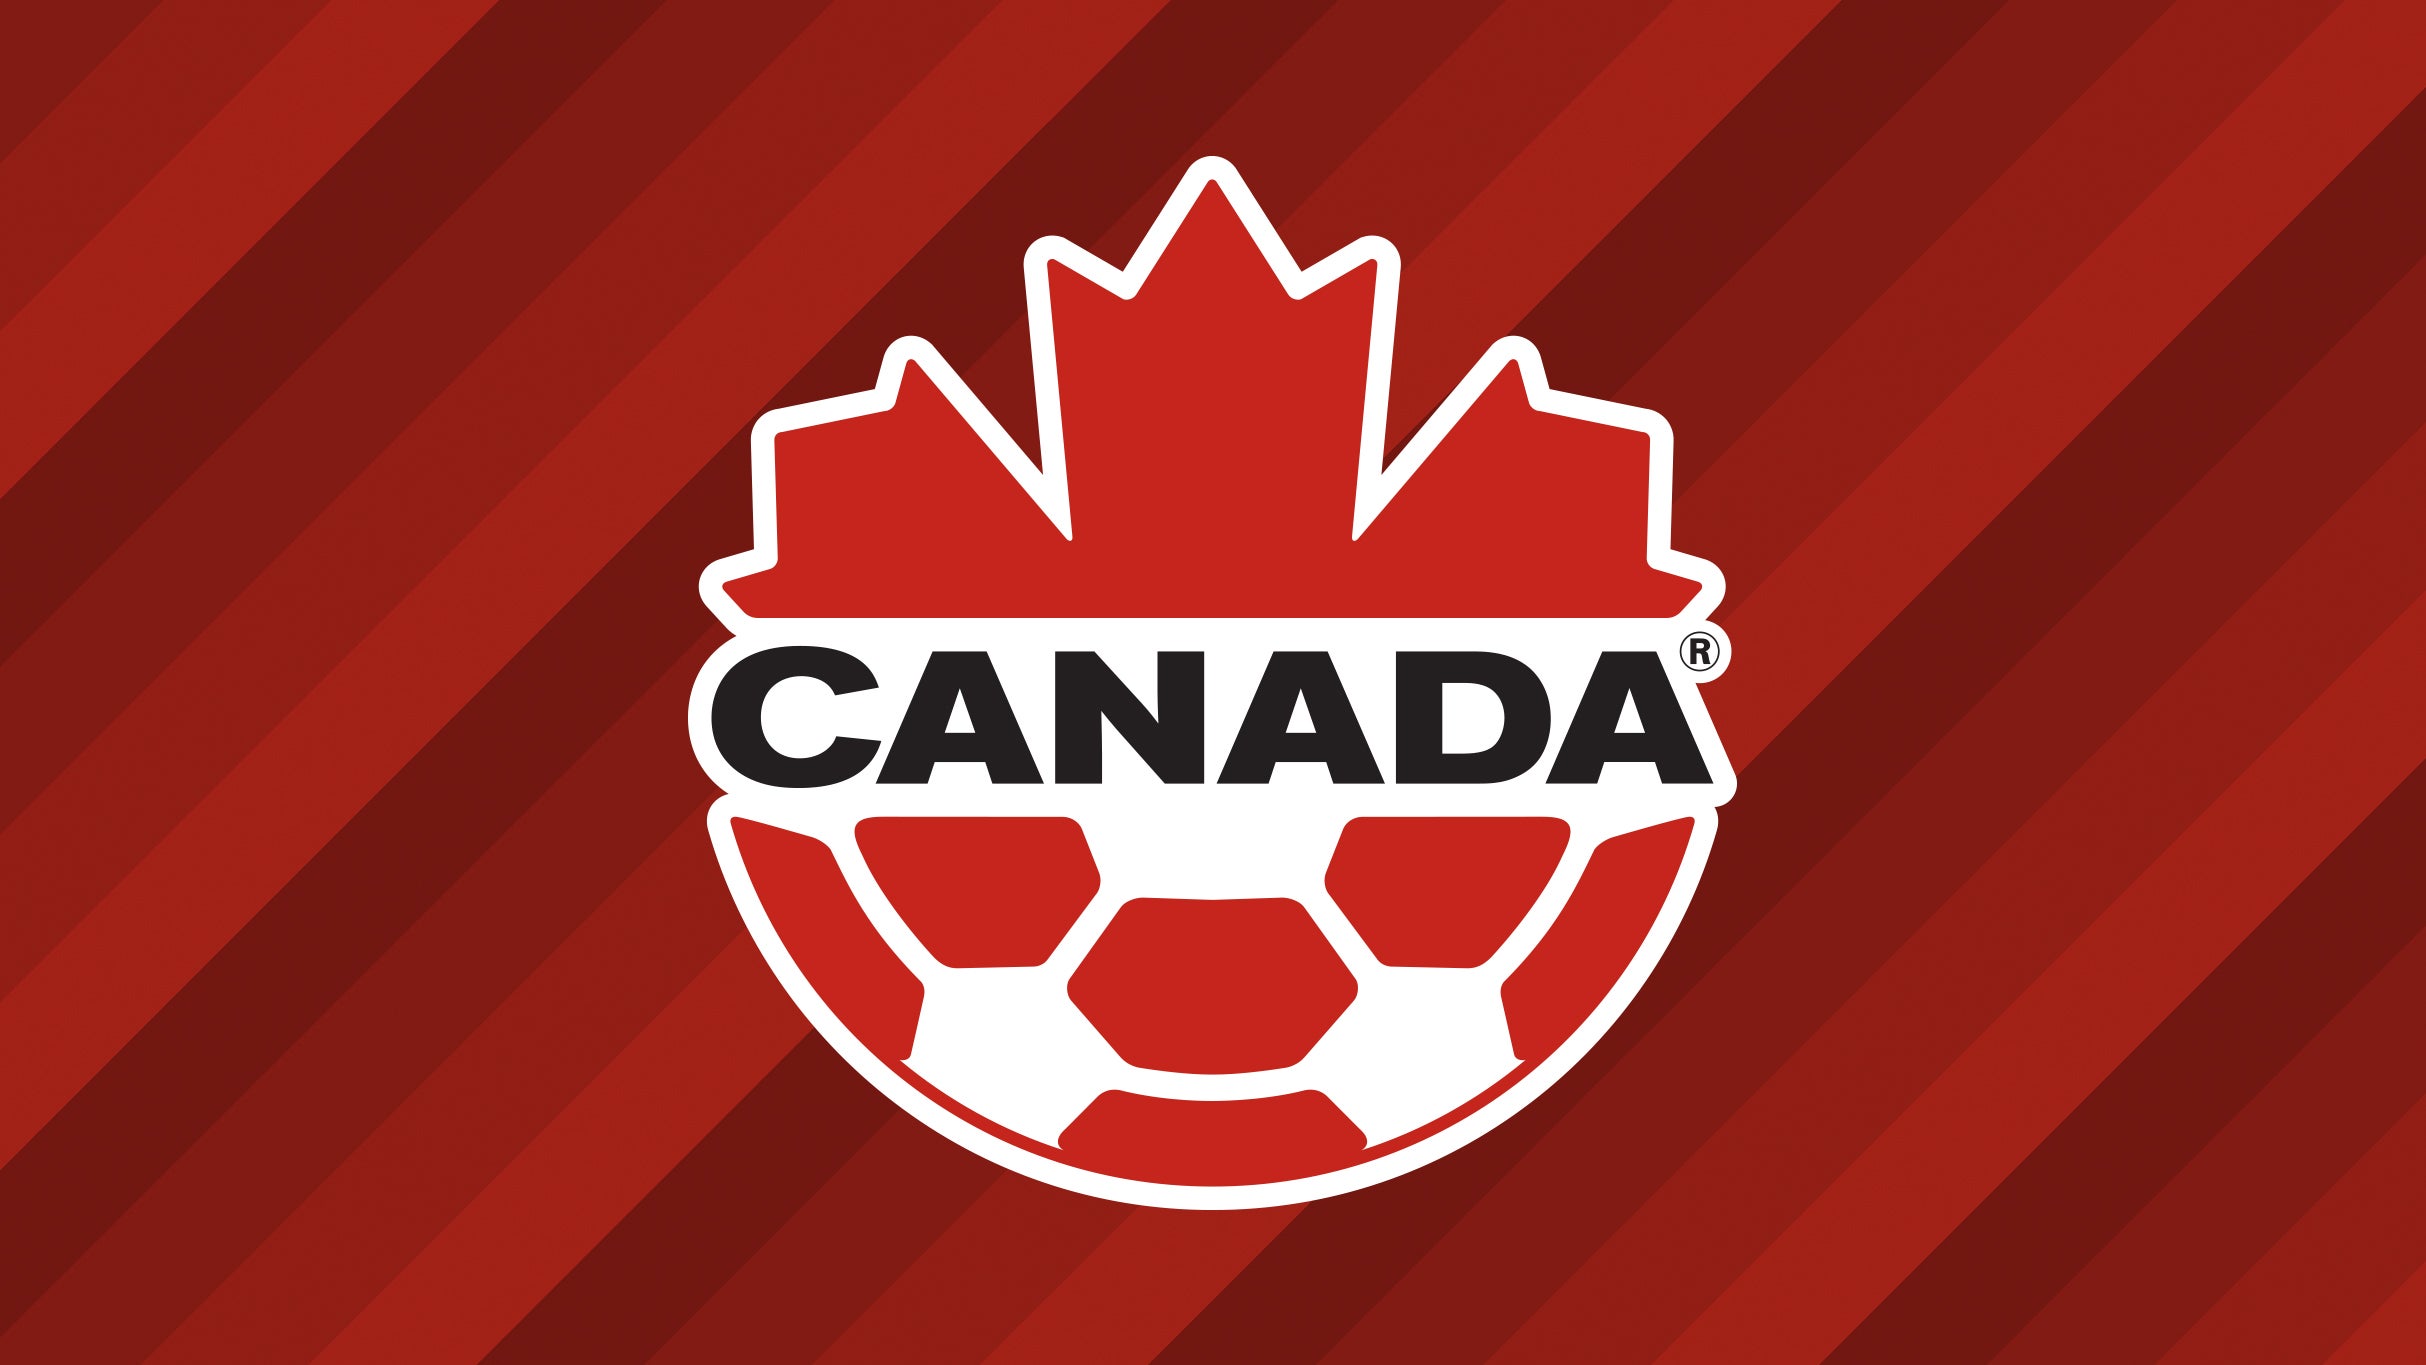 Canada WNT v MEX - Summer Send off Series in Toronto promo photo for CanadaRED+GOLD Member presale offer code